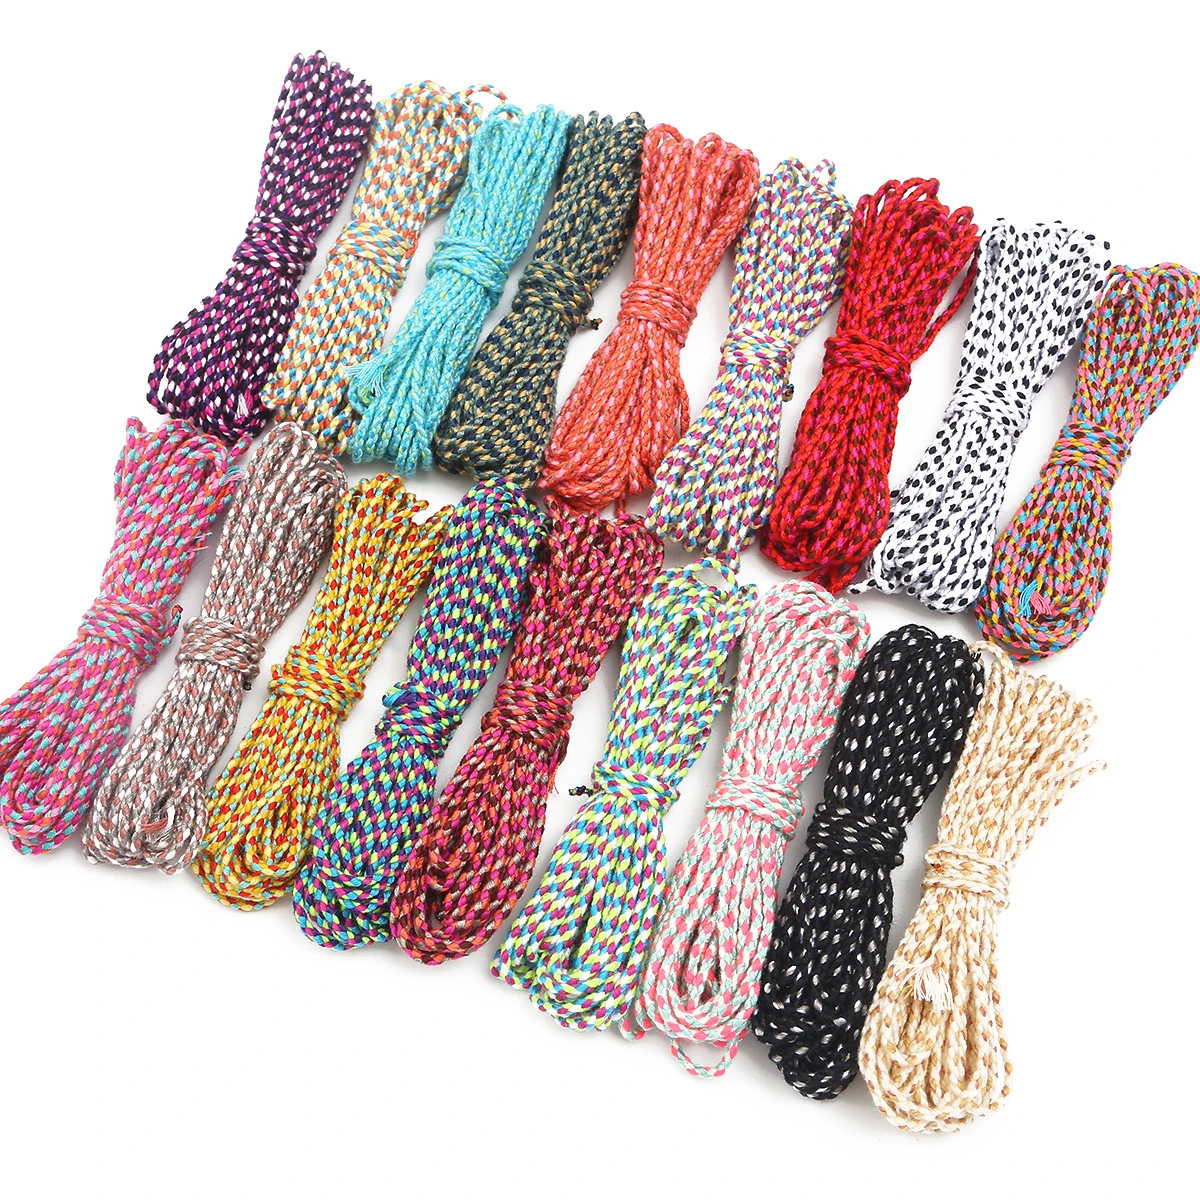 5Meter 2mm Multicolors Polyester Handmade Twisted Cord Craft